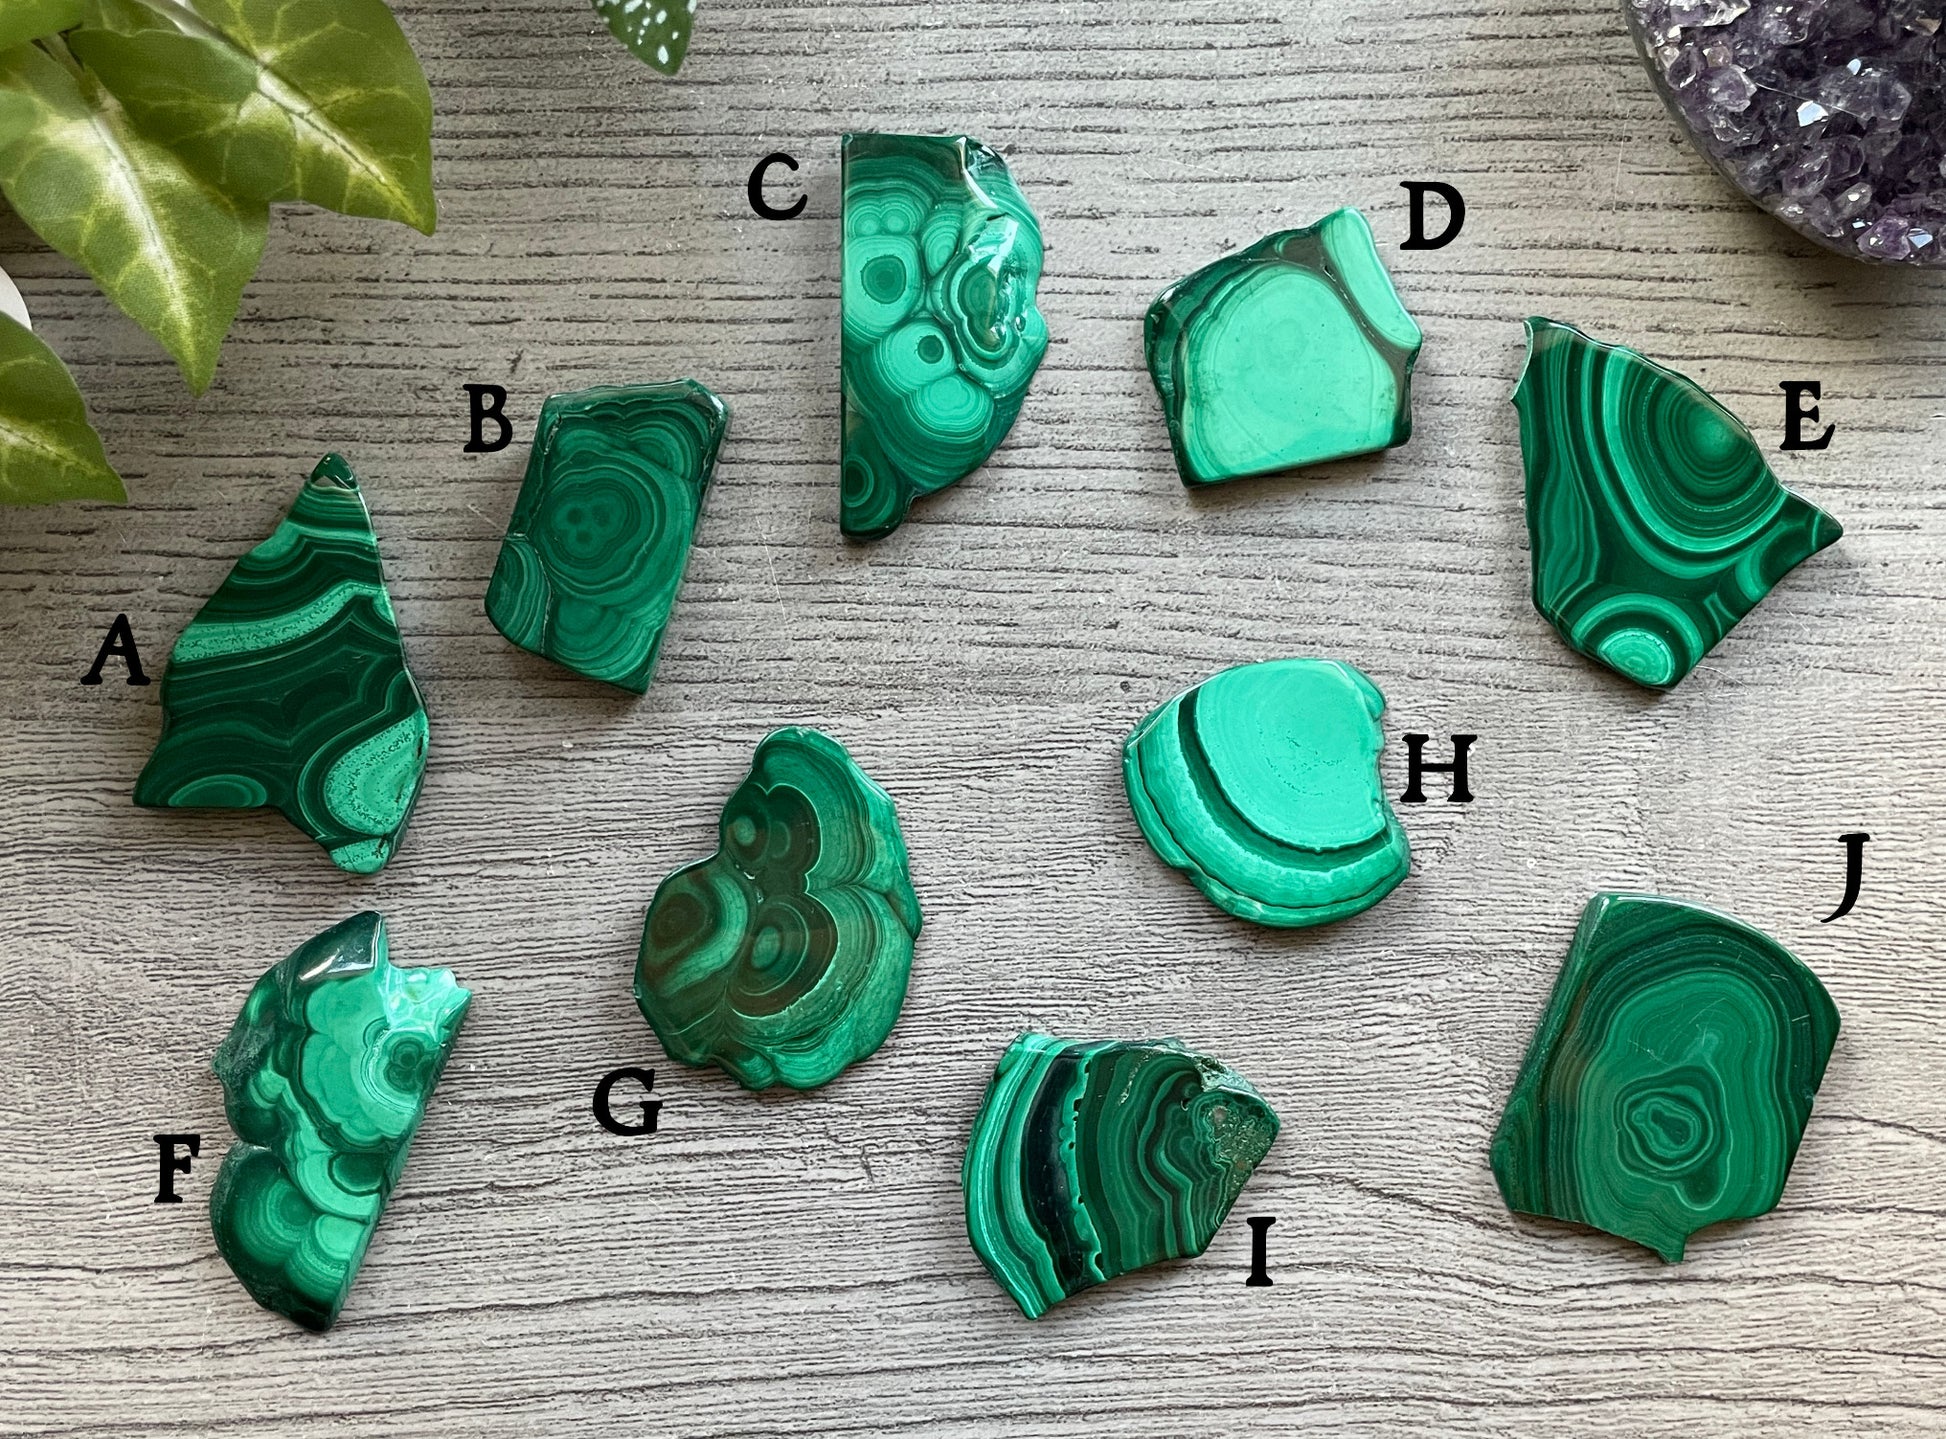 Pictured are various slabs of polished malachite.